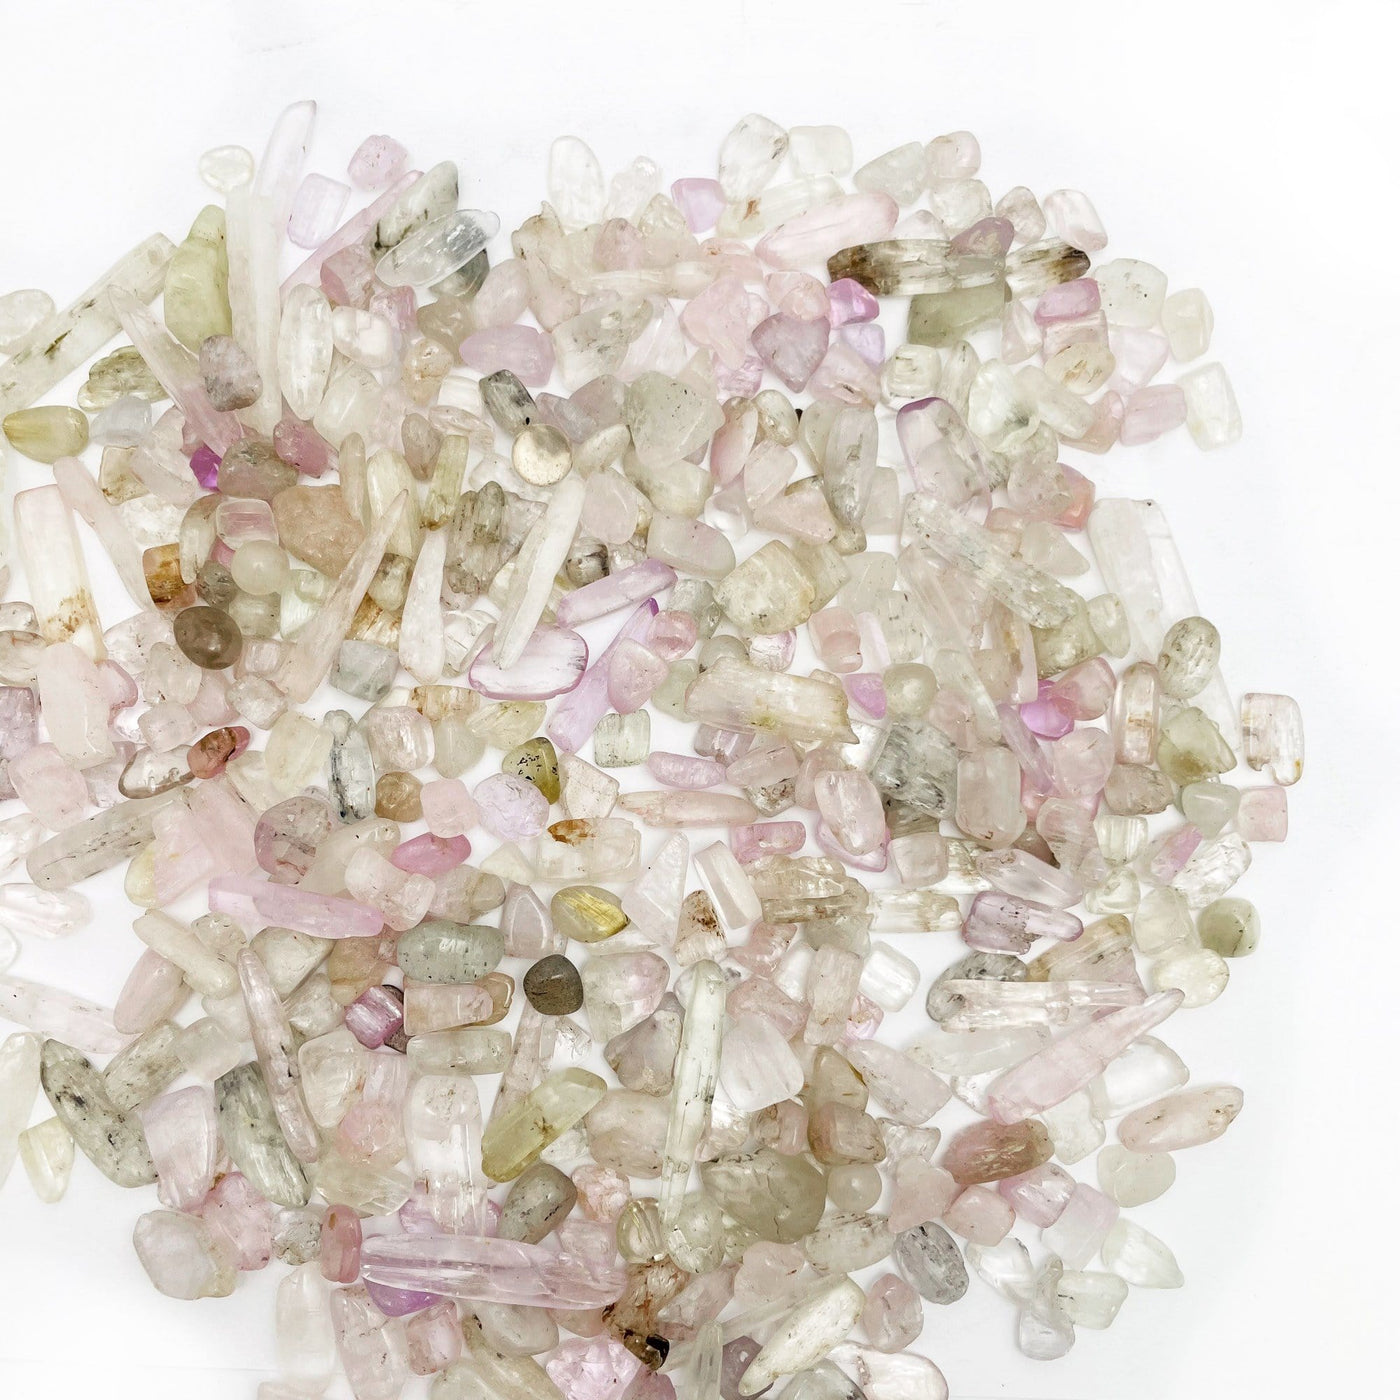 Kunzite 1lb Chips scattered on a table